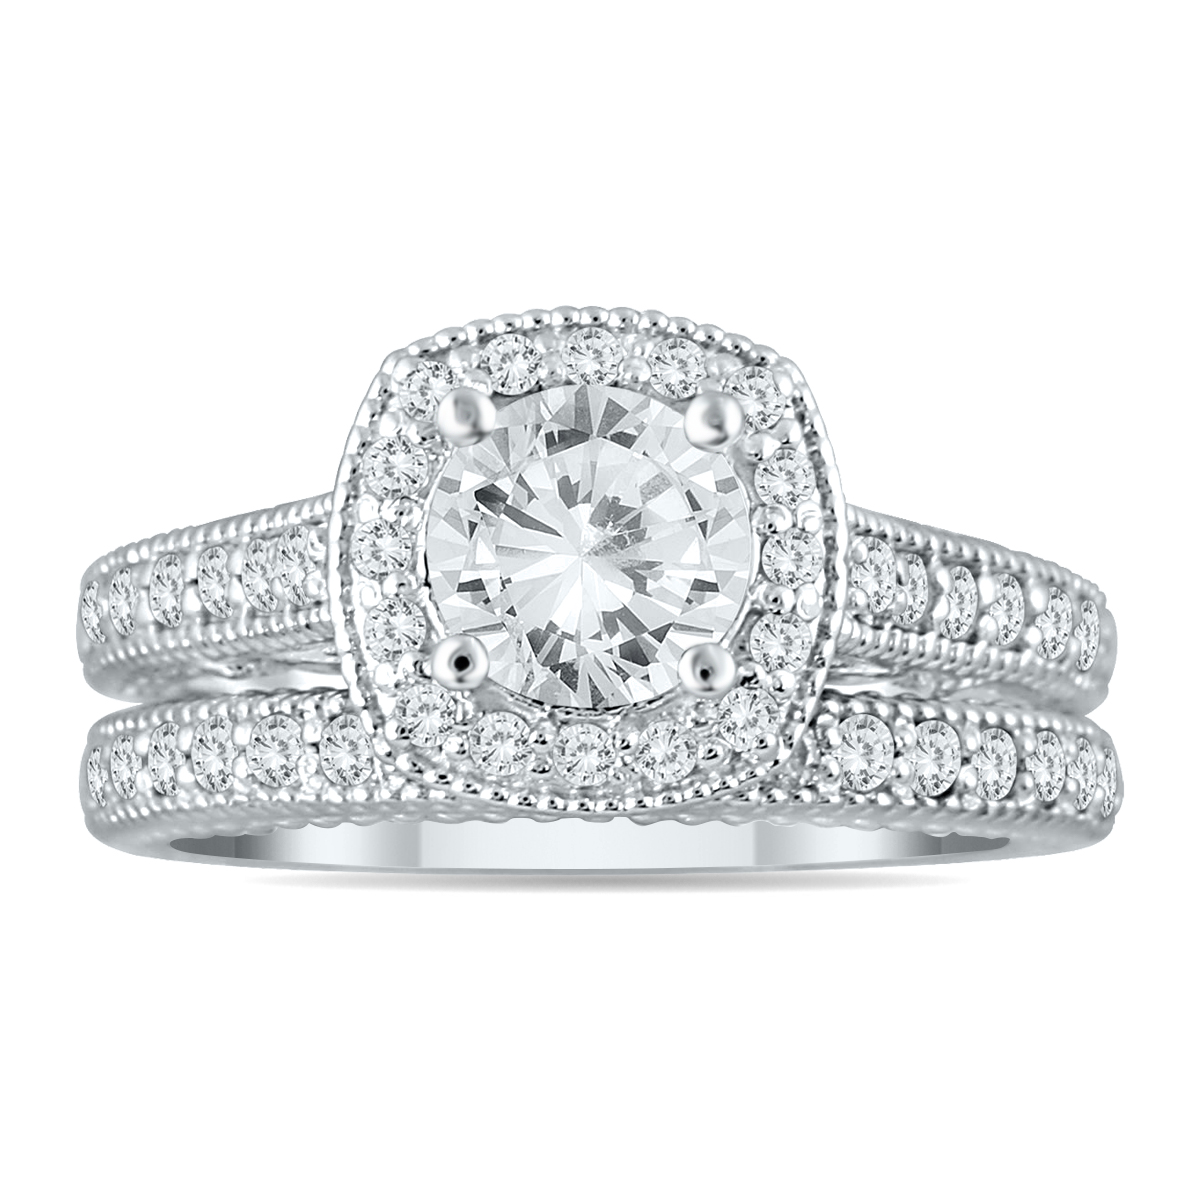 Image of AGS Certified 1 5/8 Carat TW Diamond Halo Bridal Set in 14K White Gold (H-I Color I1-I2 Clarity)